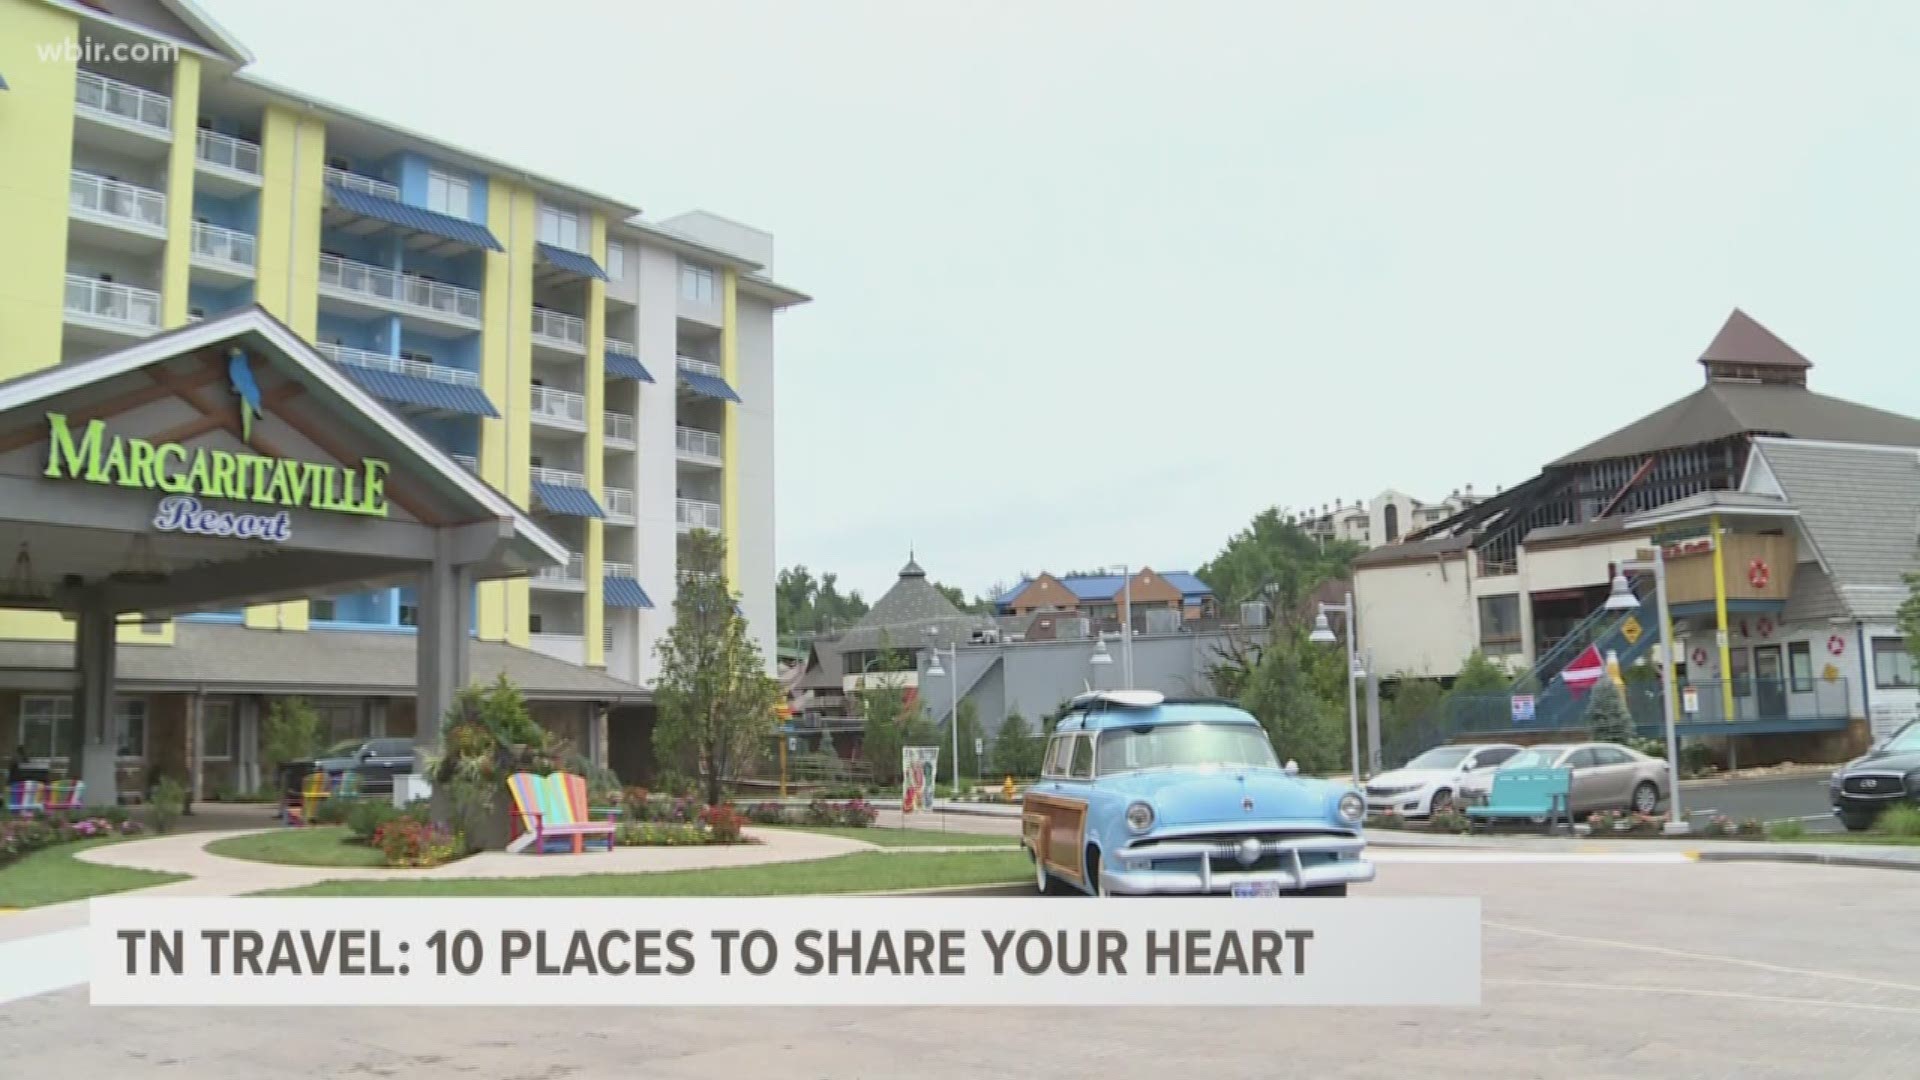 Dave Jones from the Tennessee Department of Tourist Development talked about 10 places to share your heart this Valentine's Day.